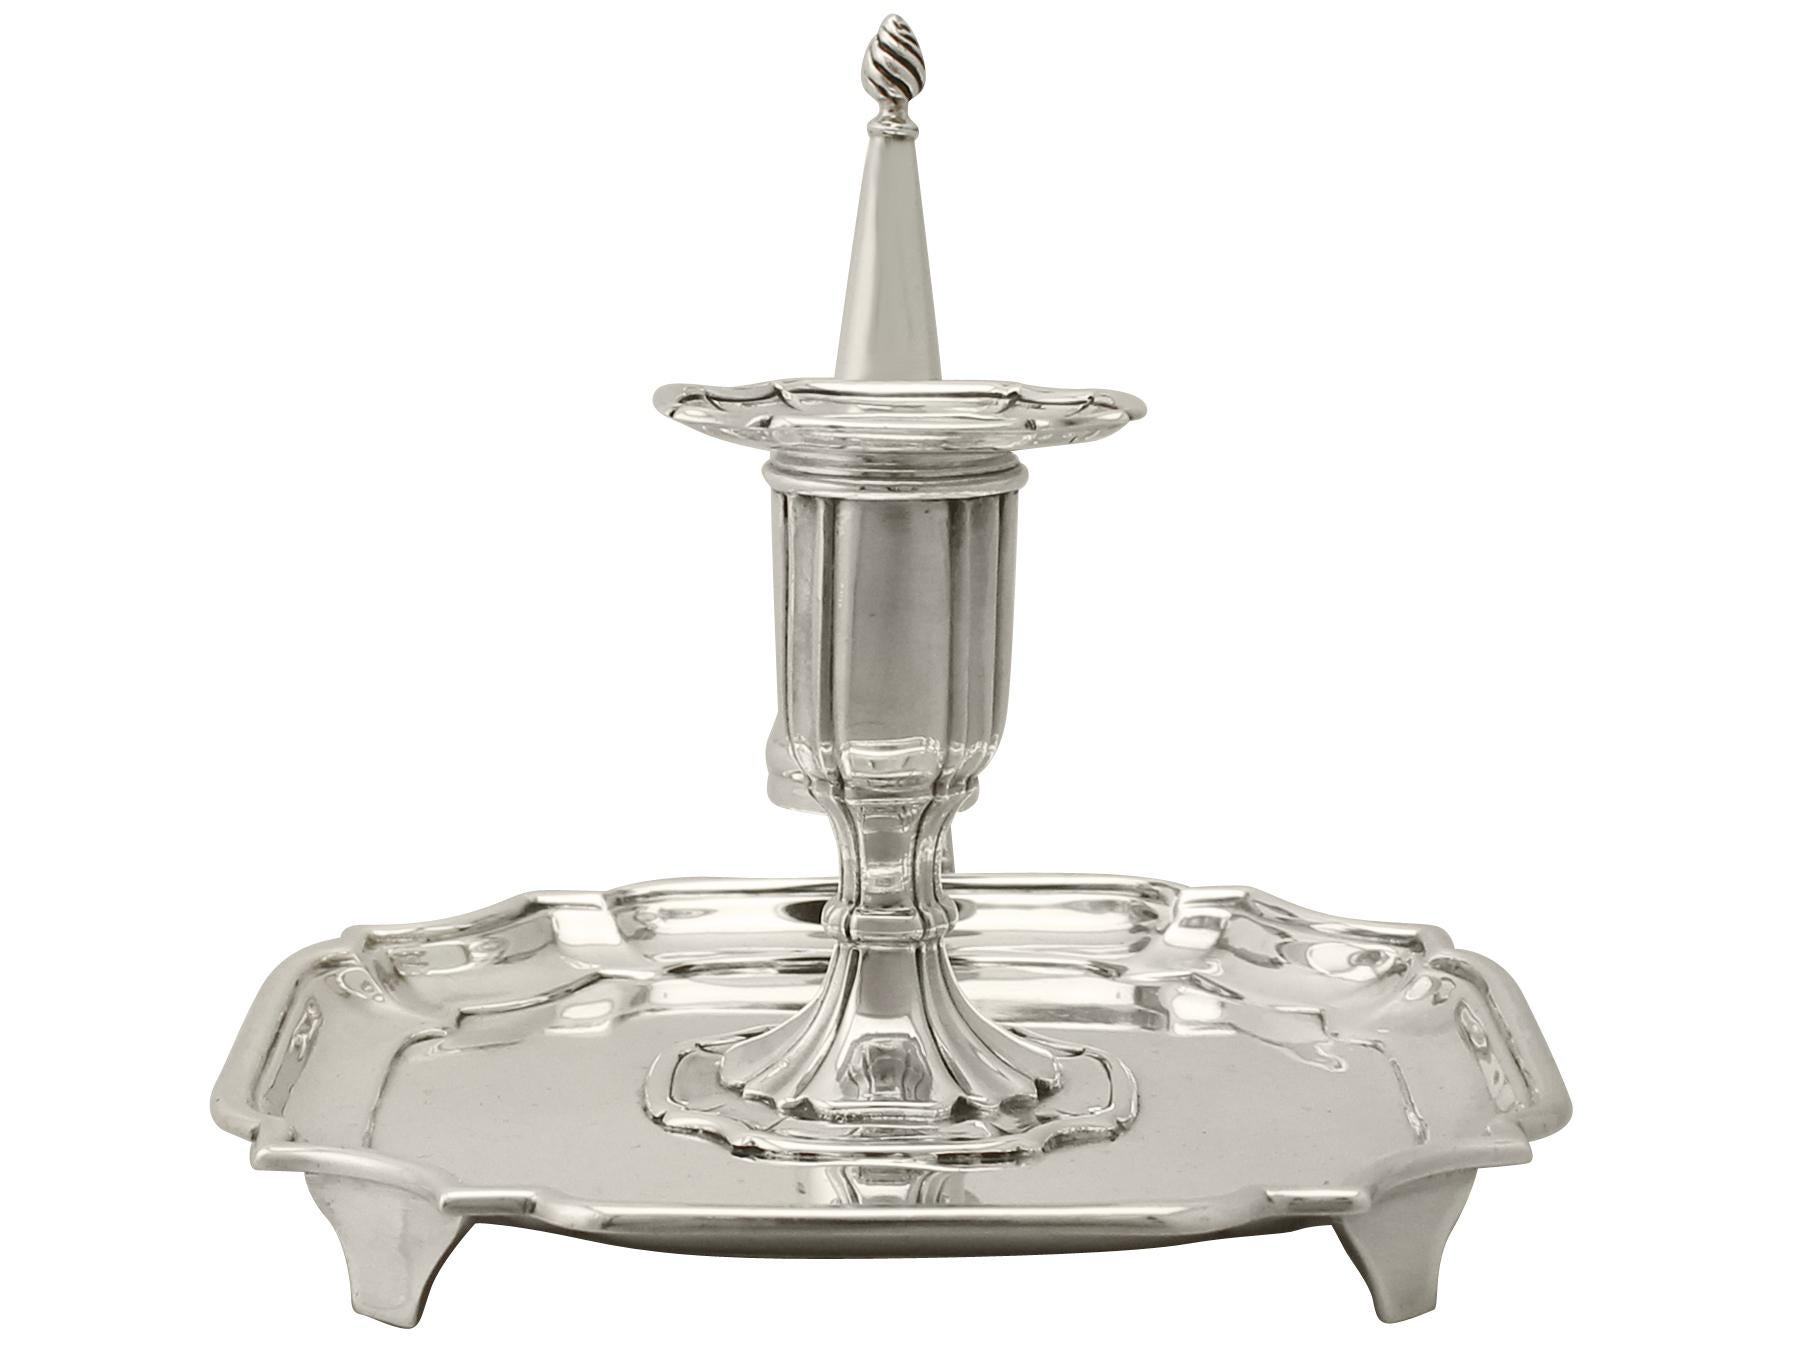 An exceptional, fine and impressive antique Edwardian English sterling silver chamber candlestick, part of our range of ornamental silverware

This exceptional antique Edwardian chamber candlestick in sterling silver has a square shaped form, in